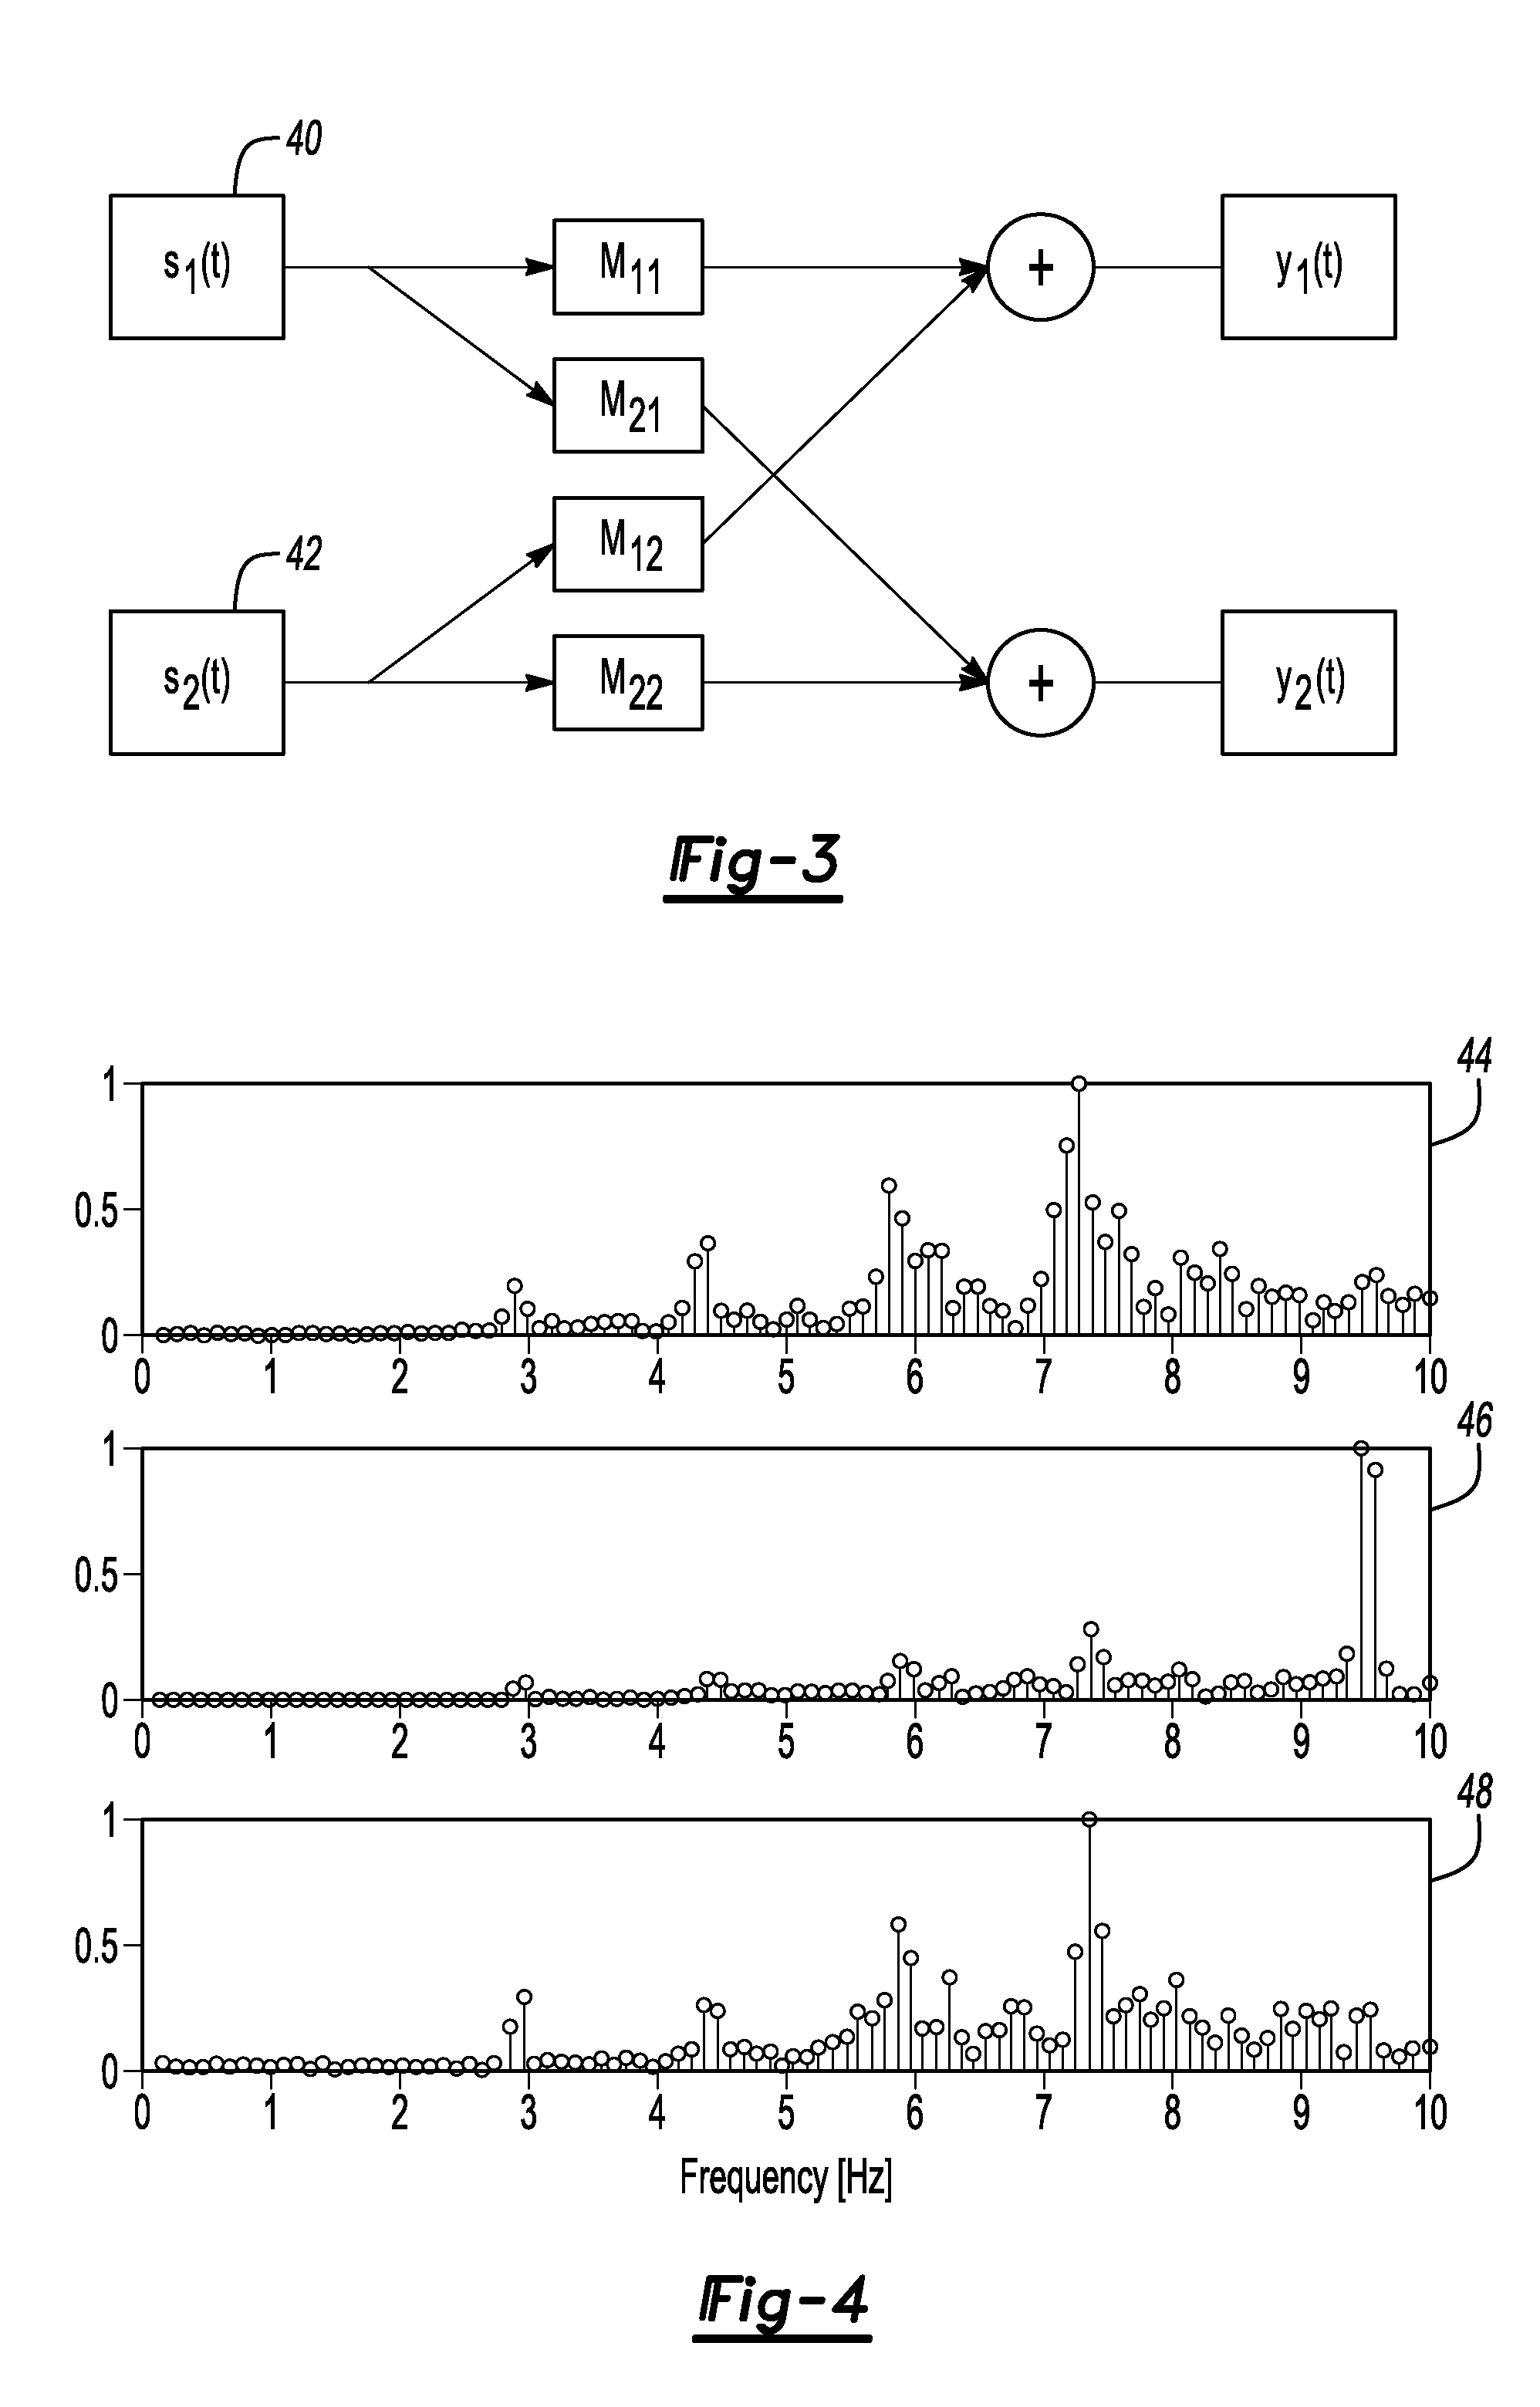 Occupant heartbeat detection and monitoring system